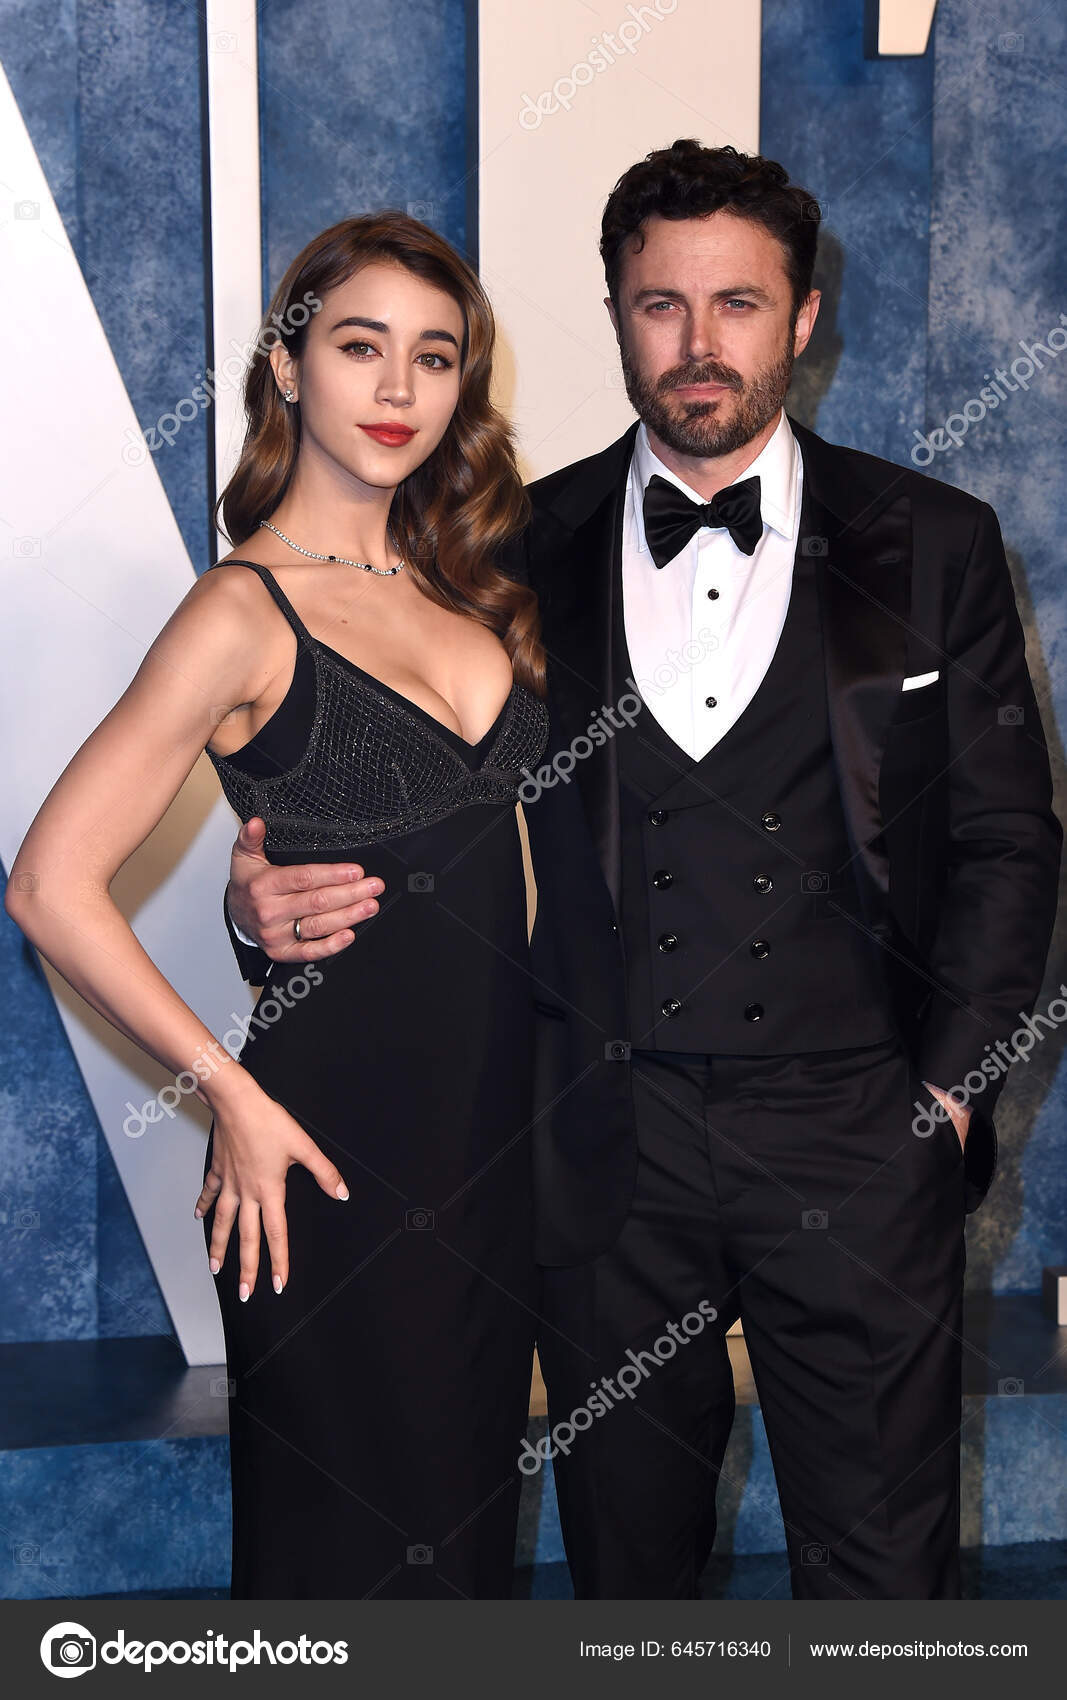 Actor Casey Affleck and his girlfriend, Caylee Cowan, pose